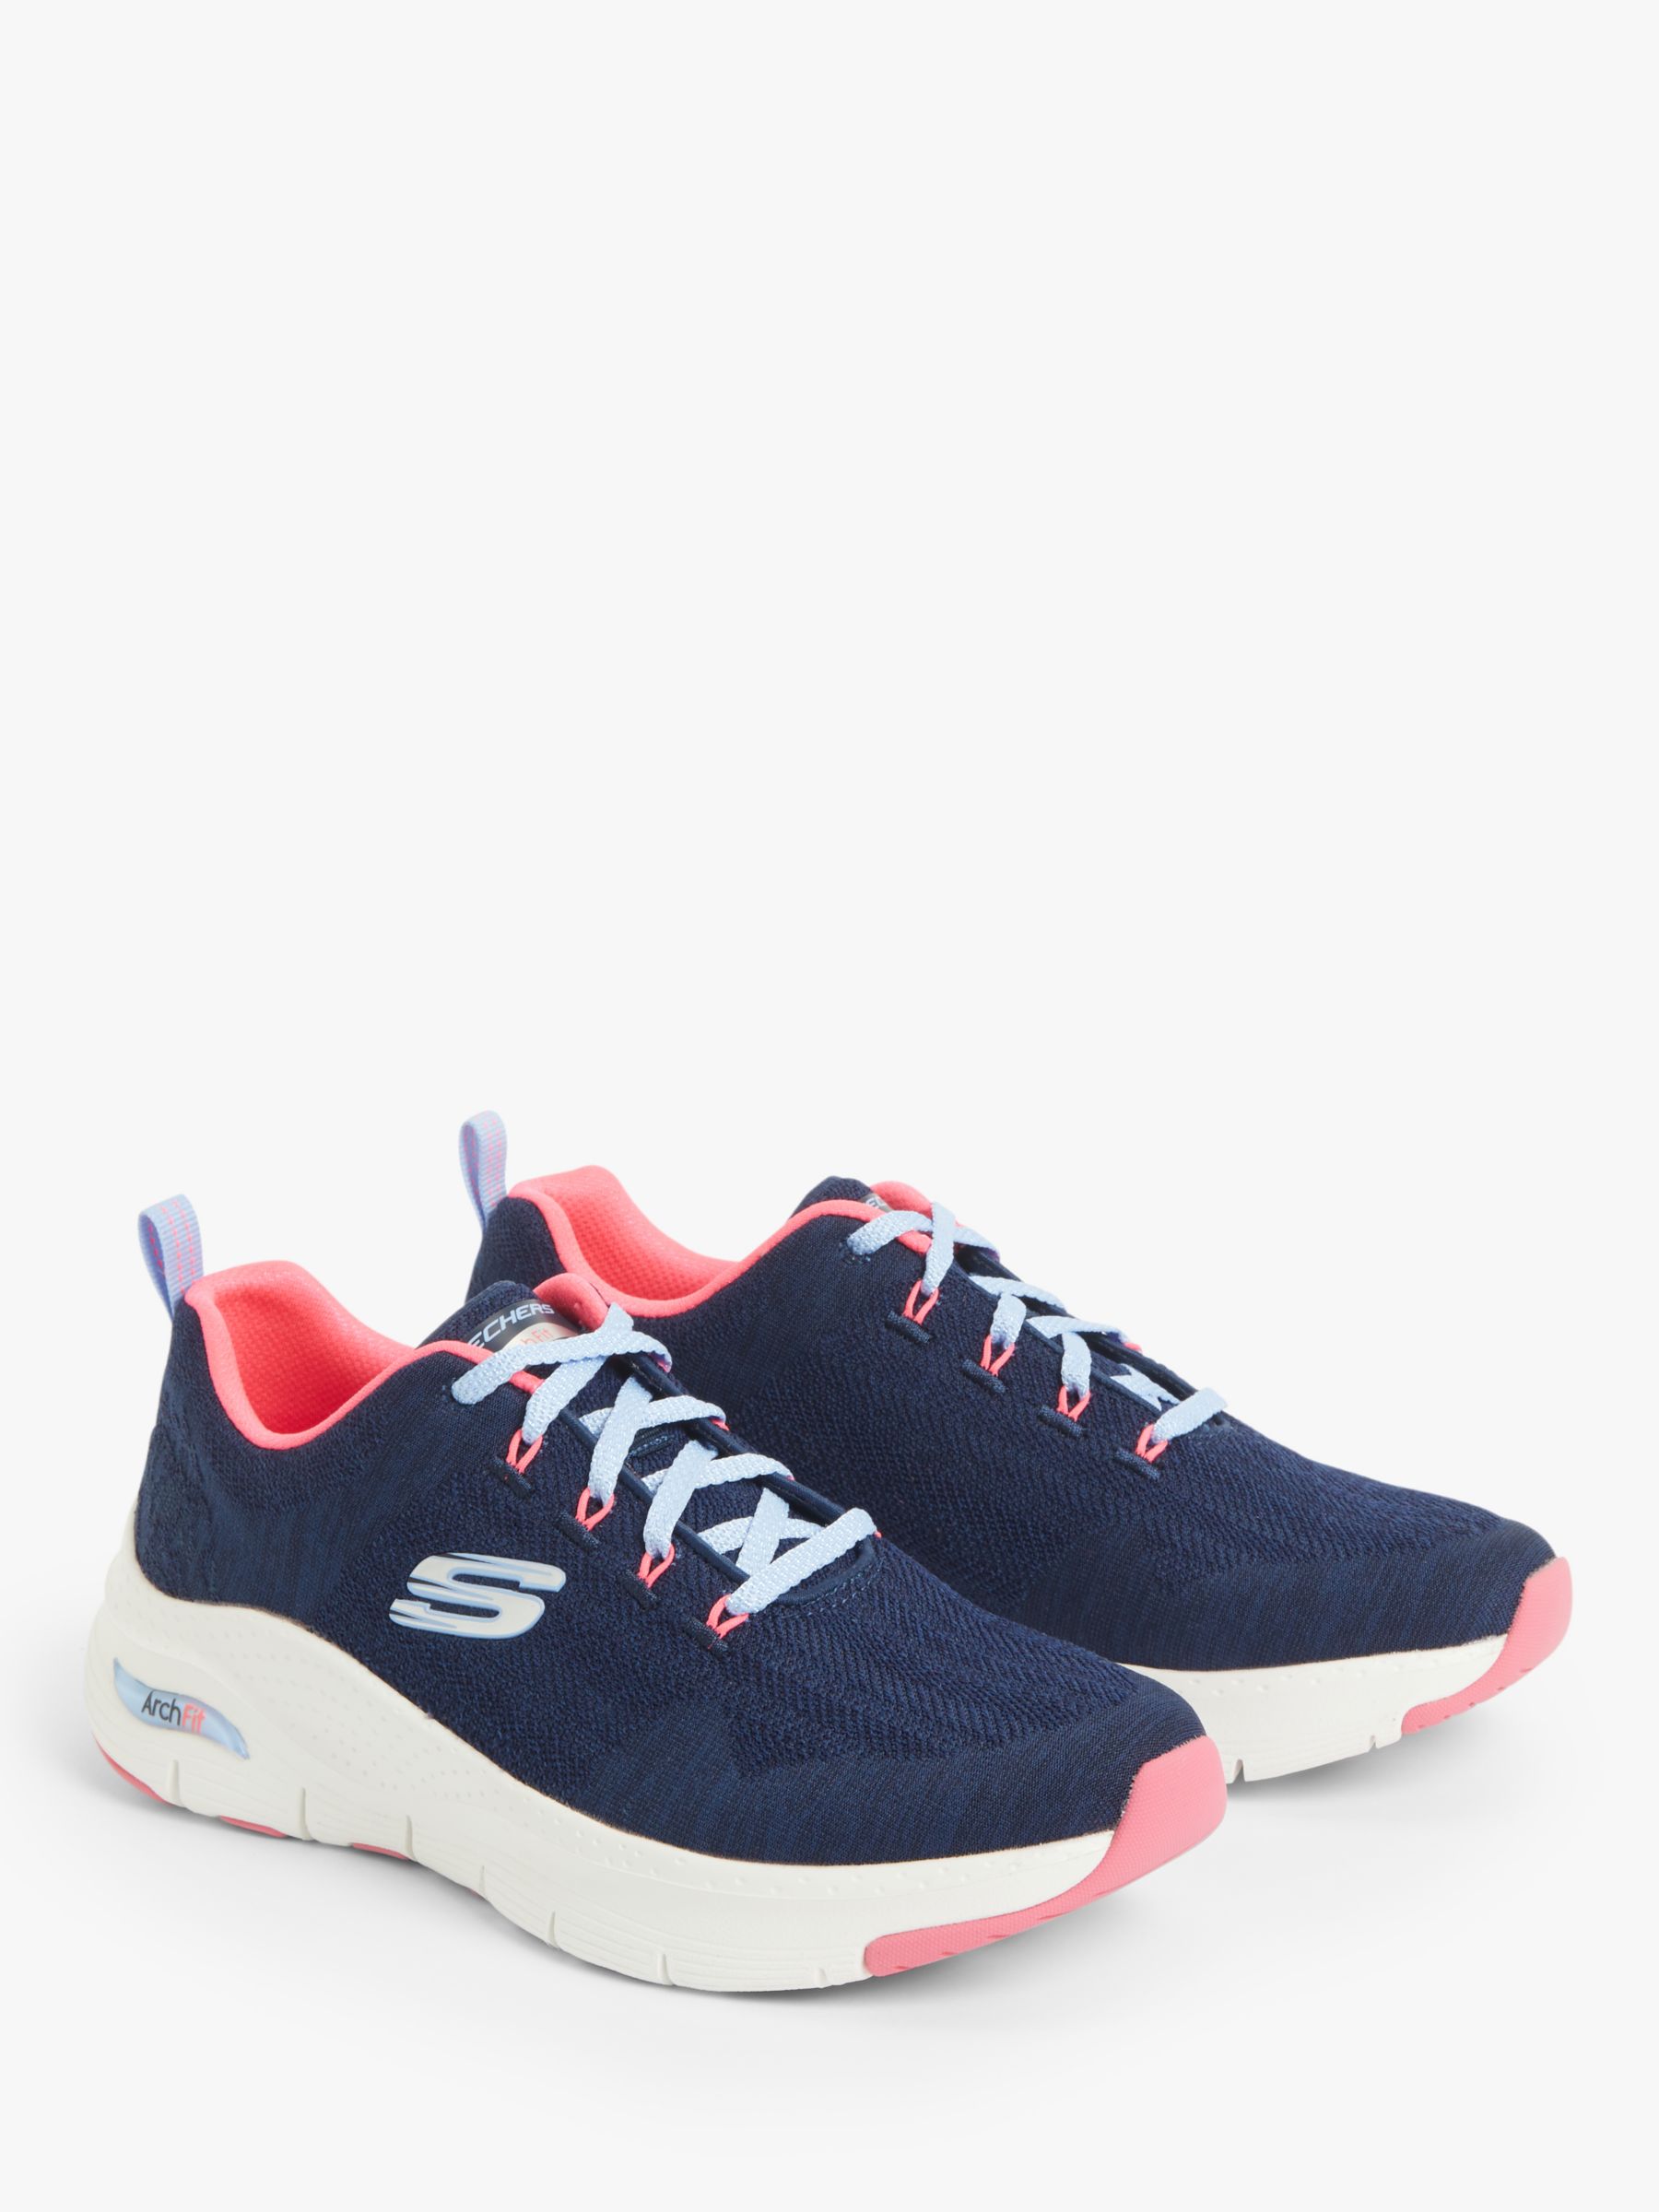 Skechers Arch Fit Wave Trainers, Navy/Pink at John Lewis & Partners